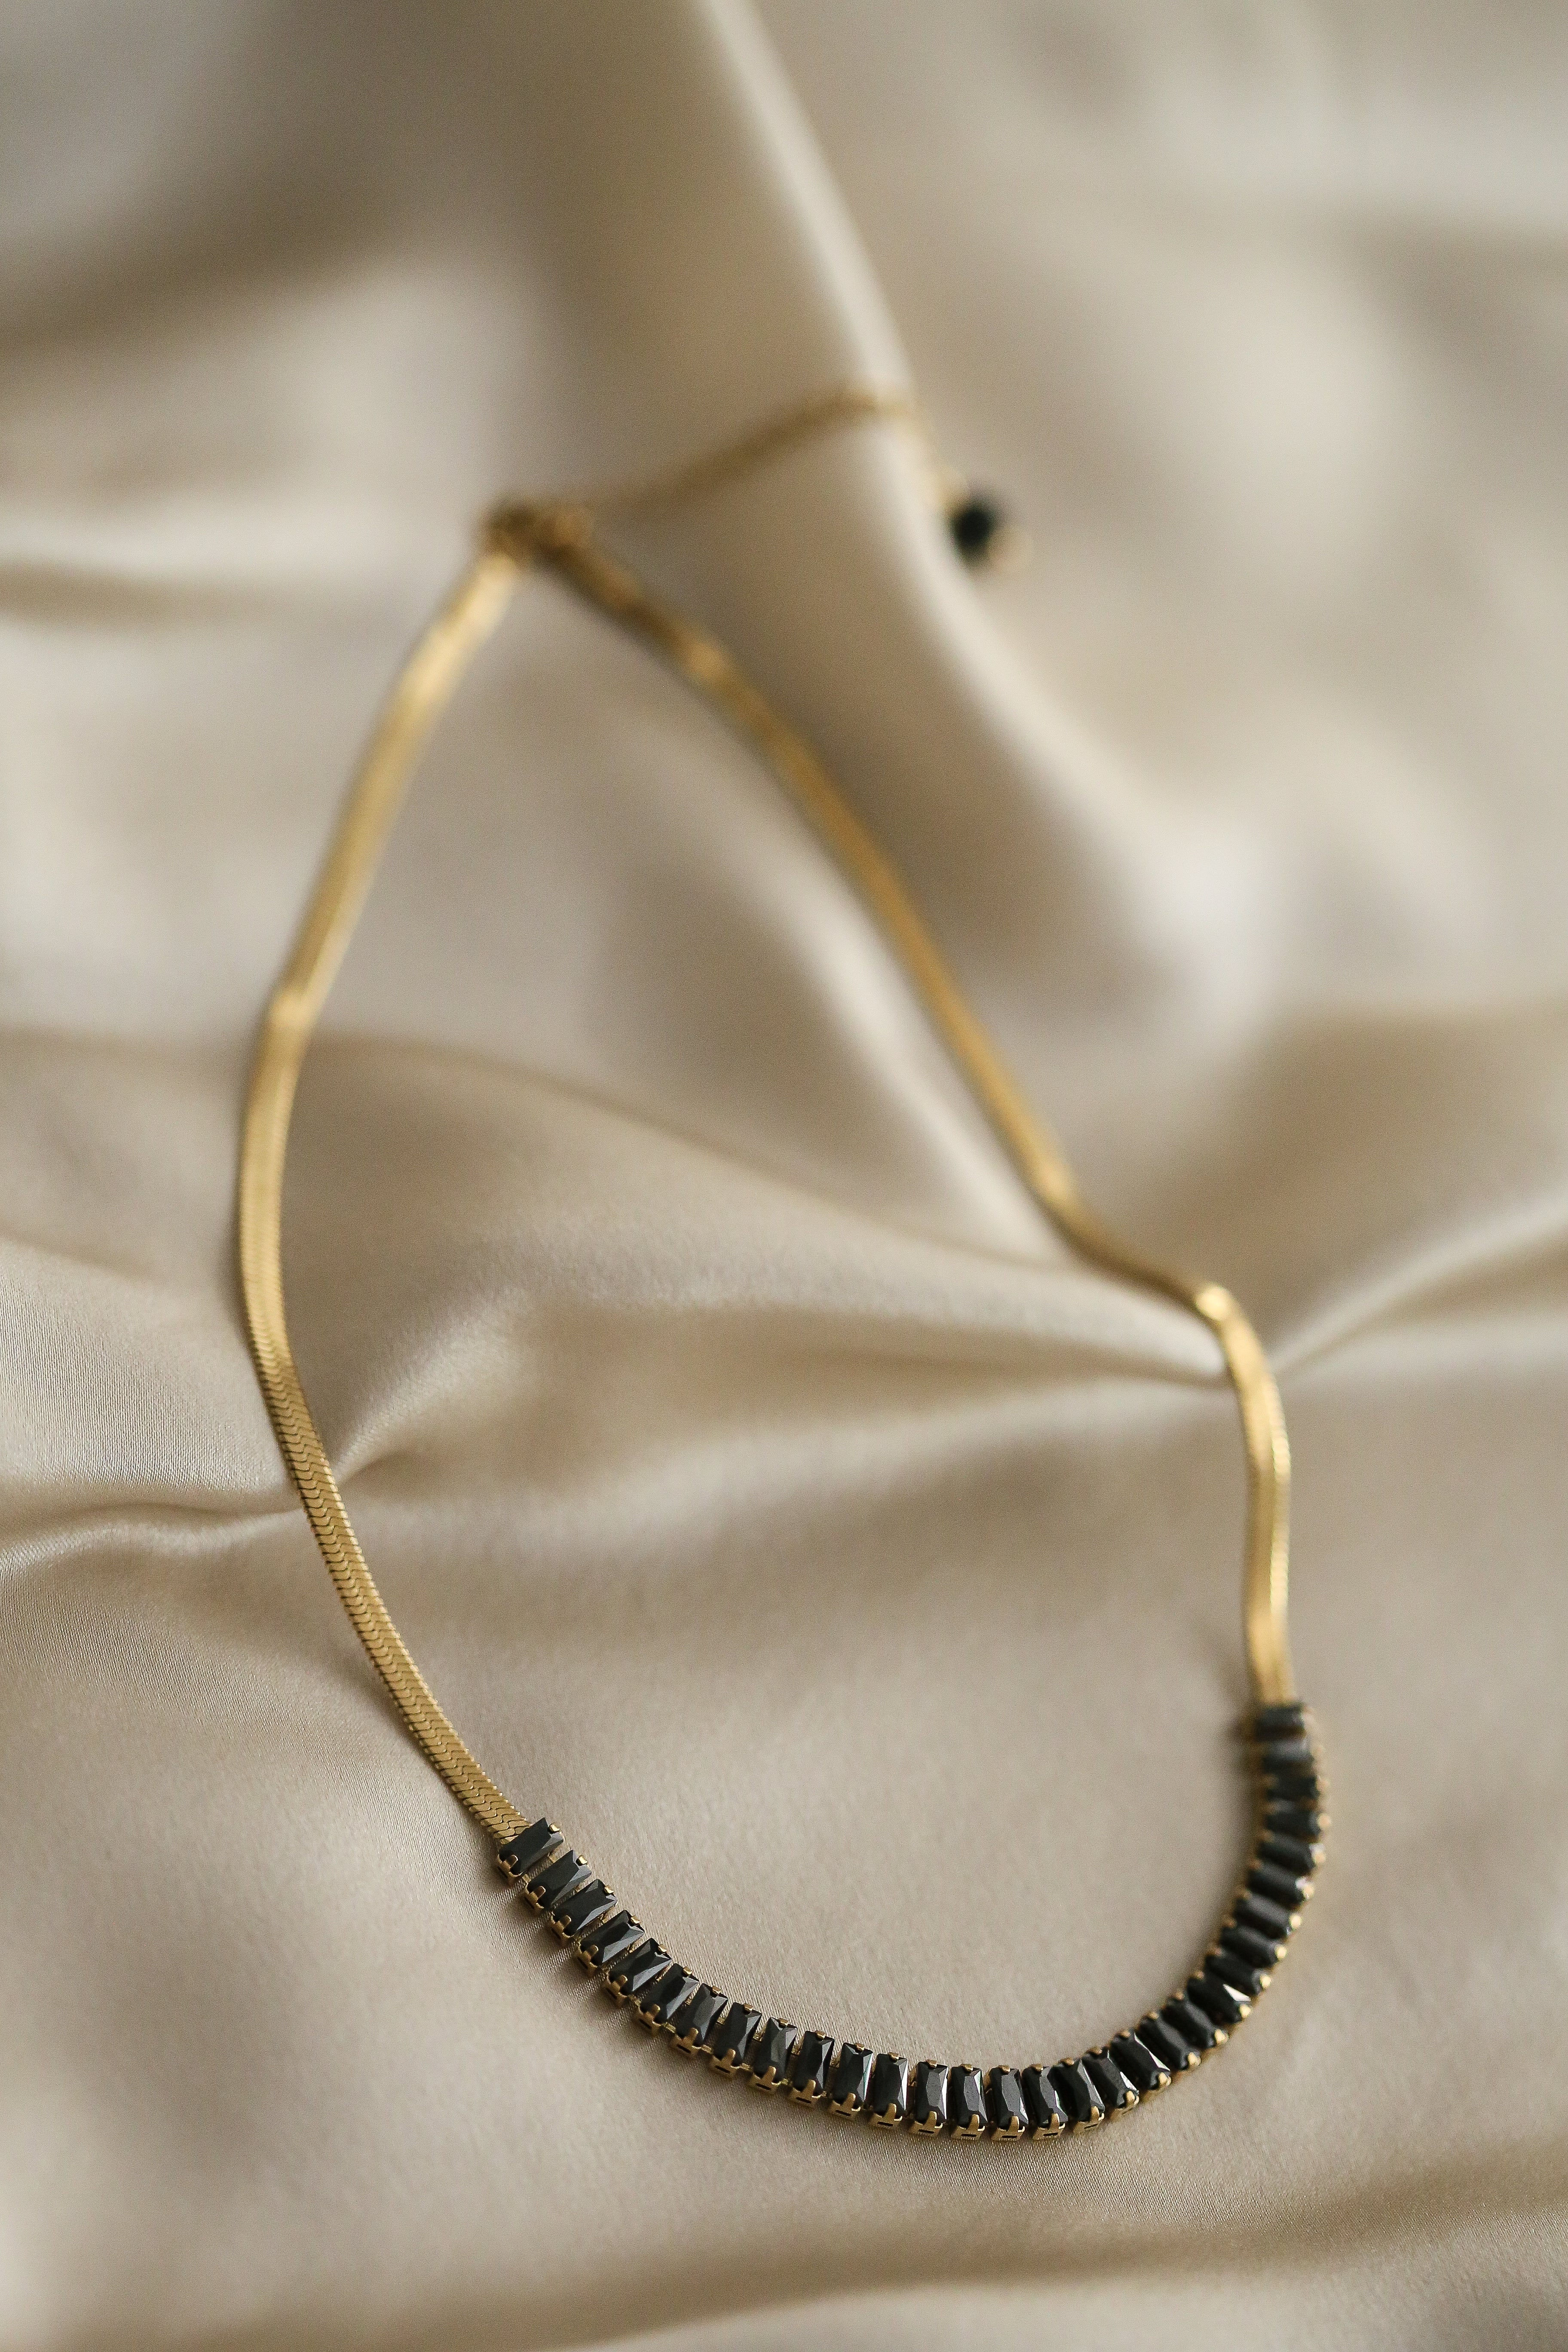 Odessa Necklace - Boutique Minimaliste has waterproof, durable, elegant and vintage inspired jewelry